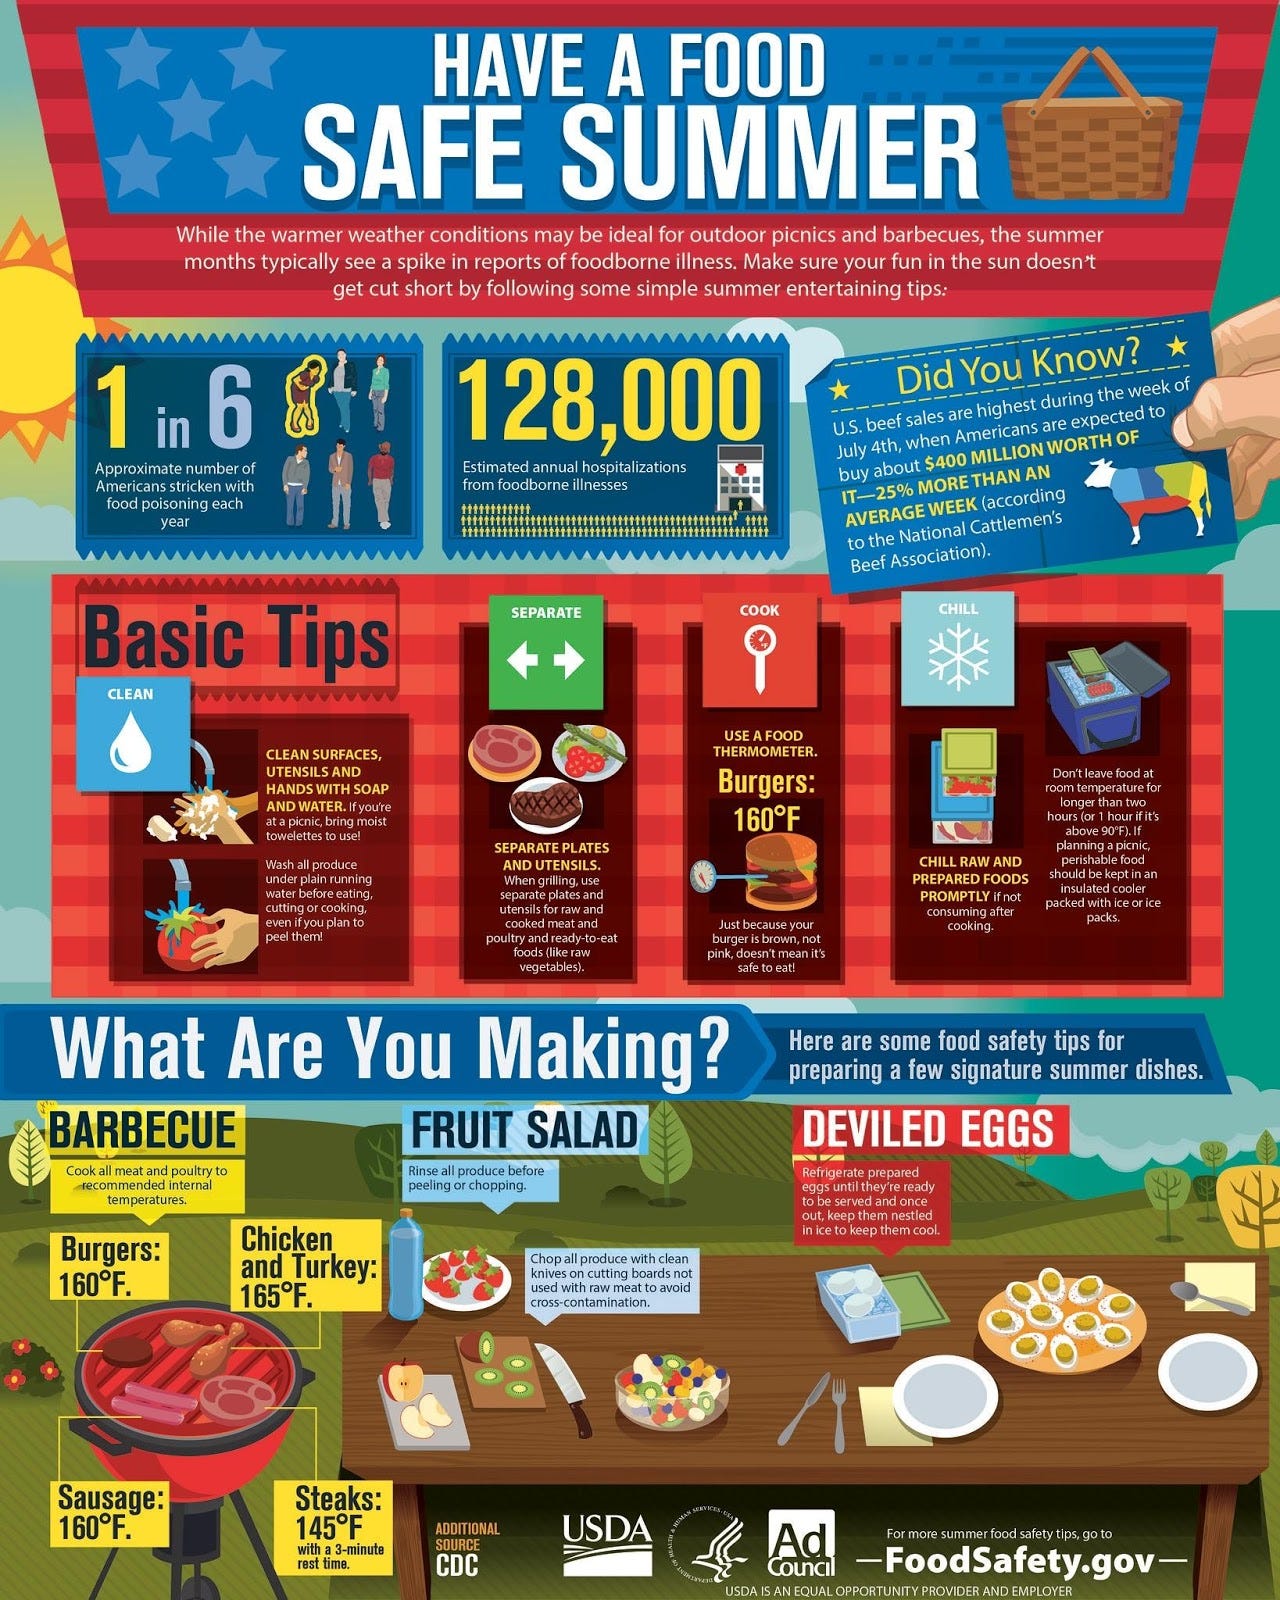 Infographic: Have a Food Safe Summer: essentially remember the four basic tips: cook, clean, chill and separate. Be extra careful when there is no fridge nearby. Keep hot foods hot and cold foods cold.